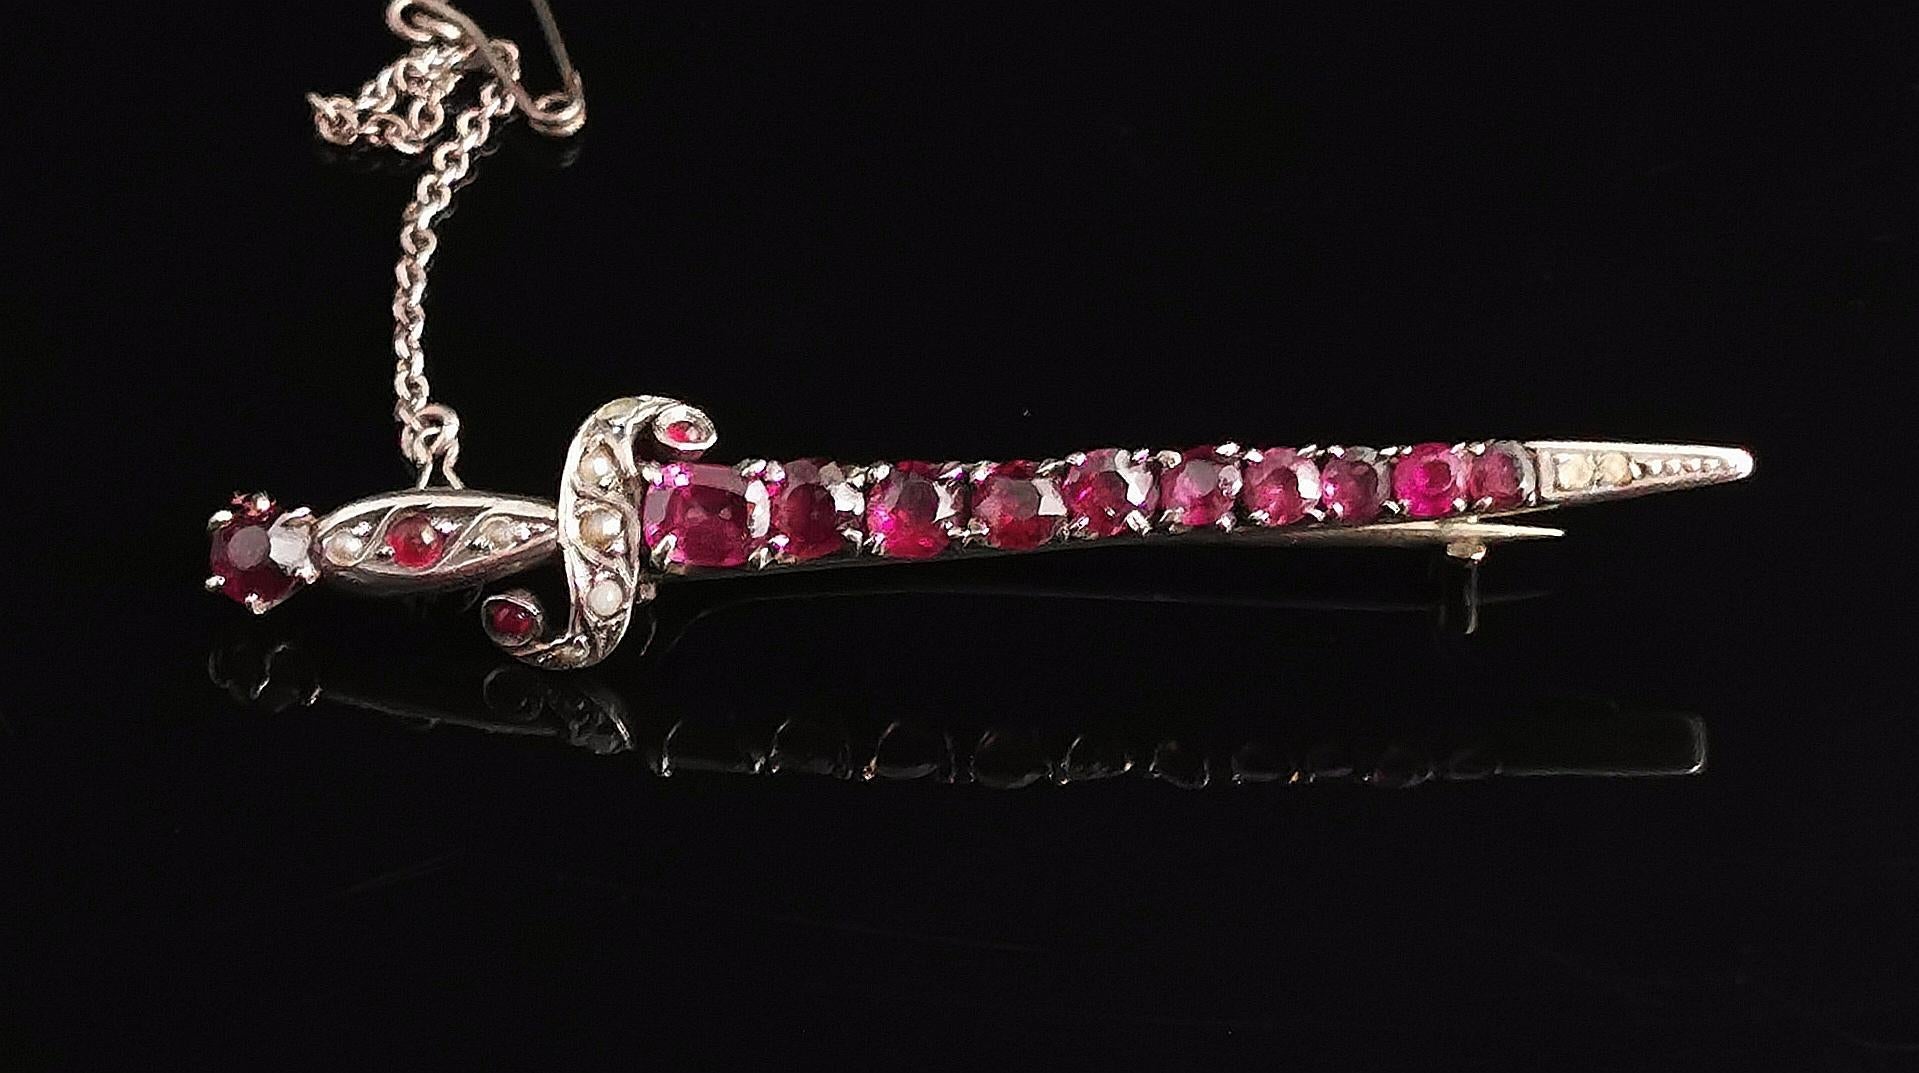 A stunning antique French sword or dagger brooch.

Set in silver this brooch has a beautiful design with a scrolling handle and twinkling gem set blade.

It is filled with pretty rhodolite garnets, all round apart from the Garnet to the top of the